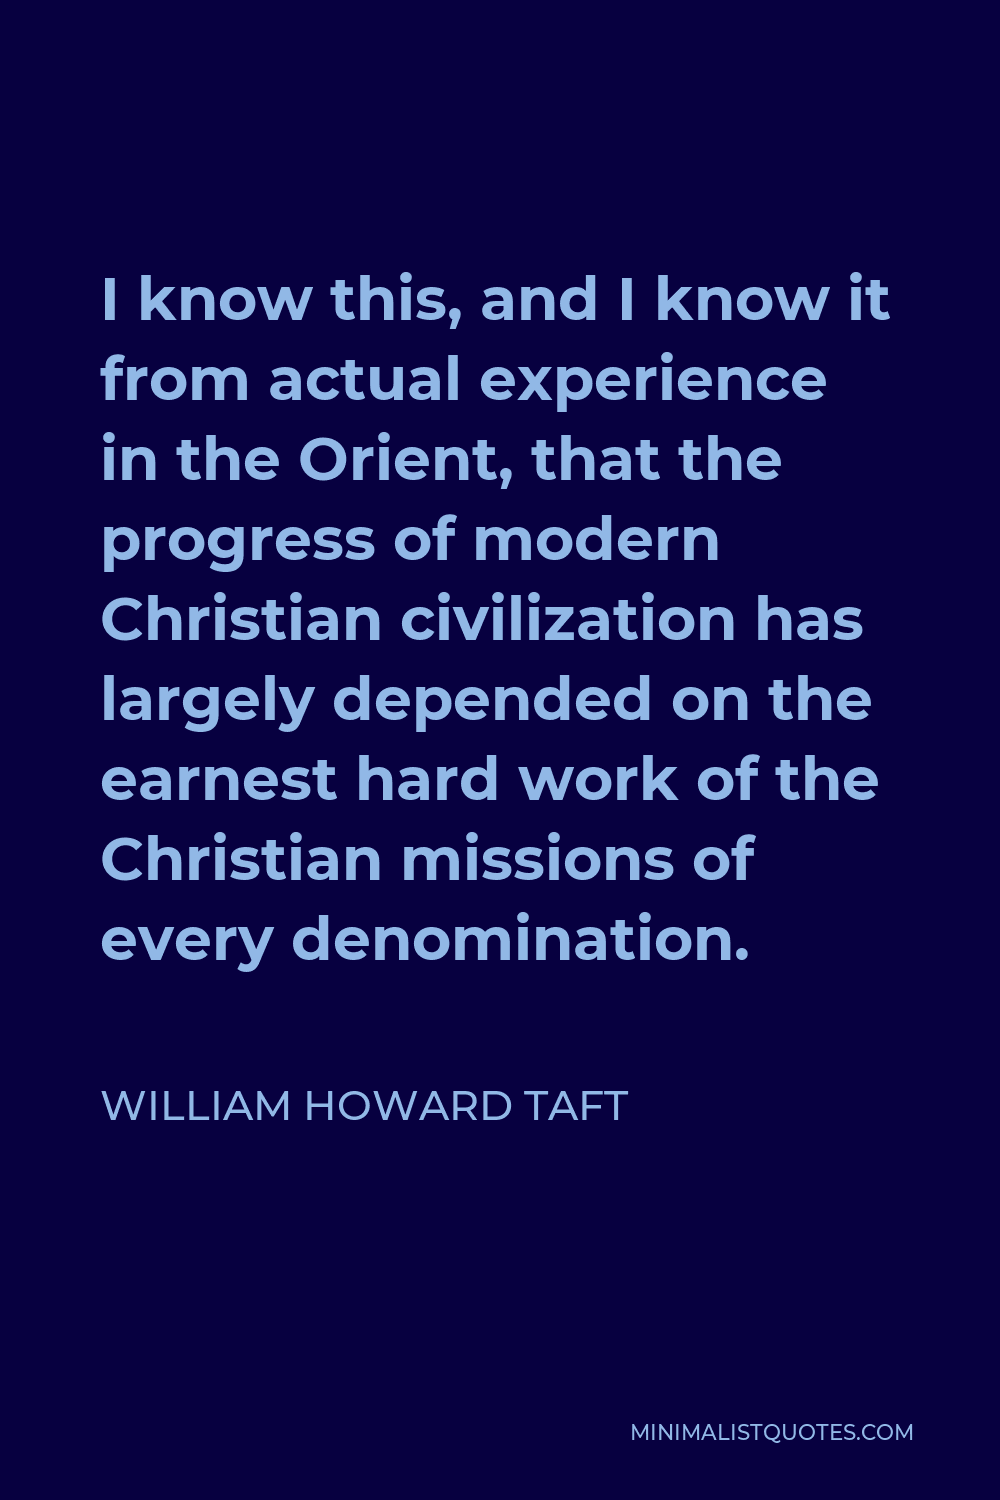 William Howard Taft Quote - I know this, and I know it from actual experience in the Orient, that the progress of modern Christian civilization has largely depended on the earnest hard work of the Christian missions of every denomination.